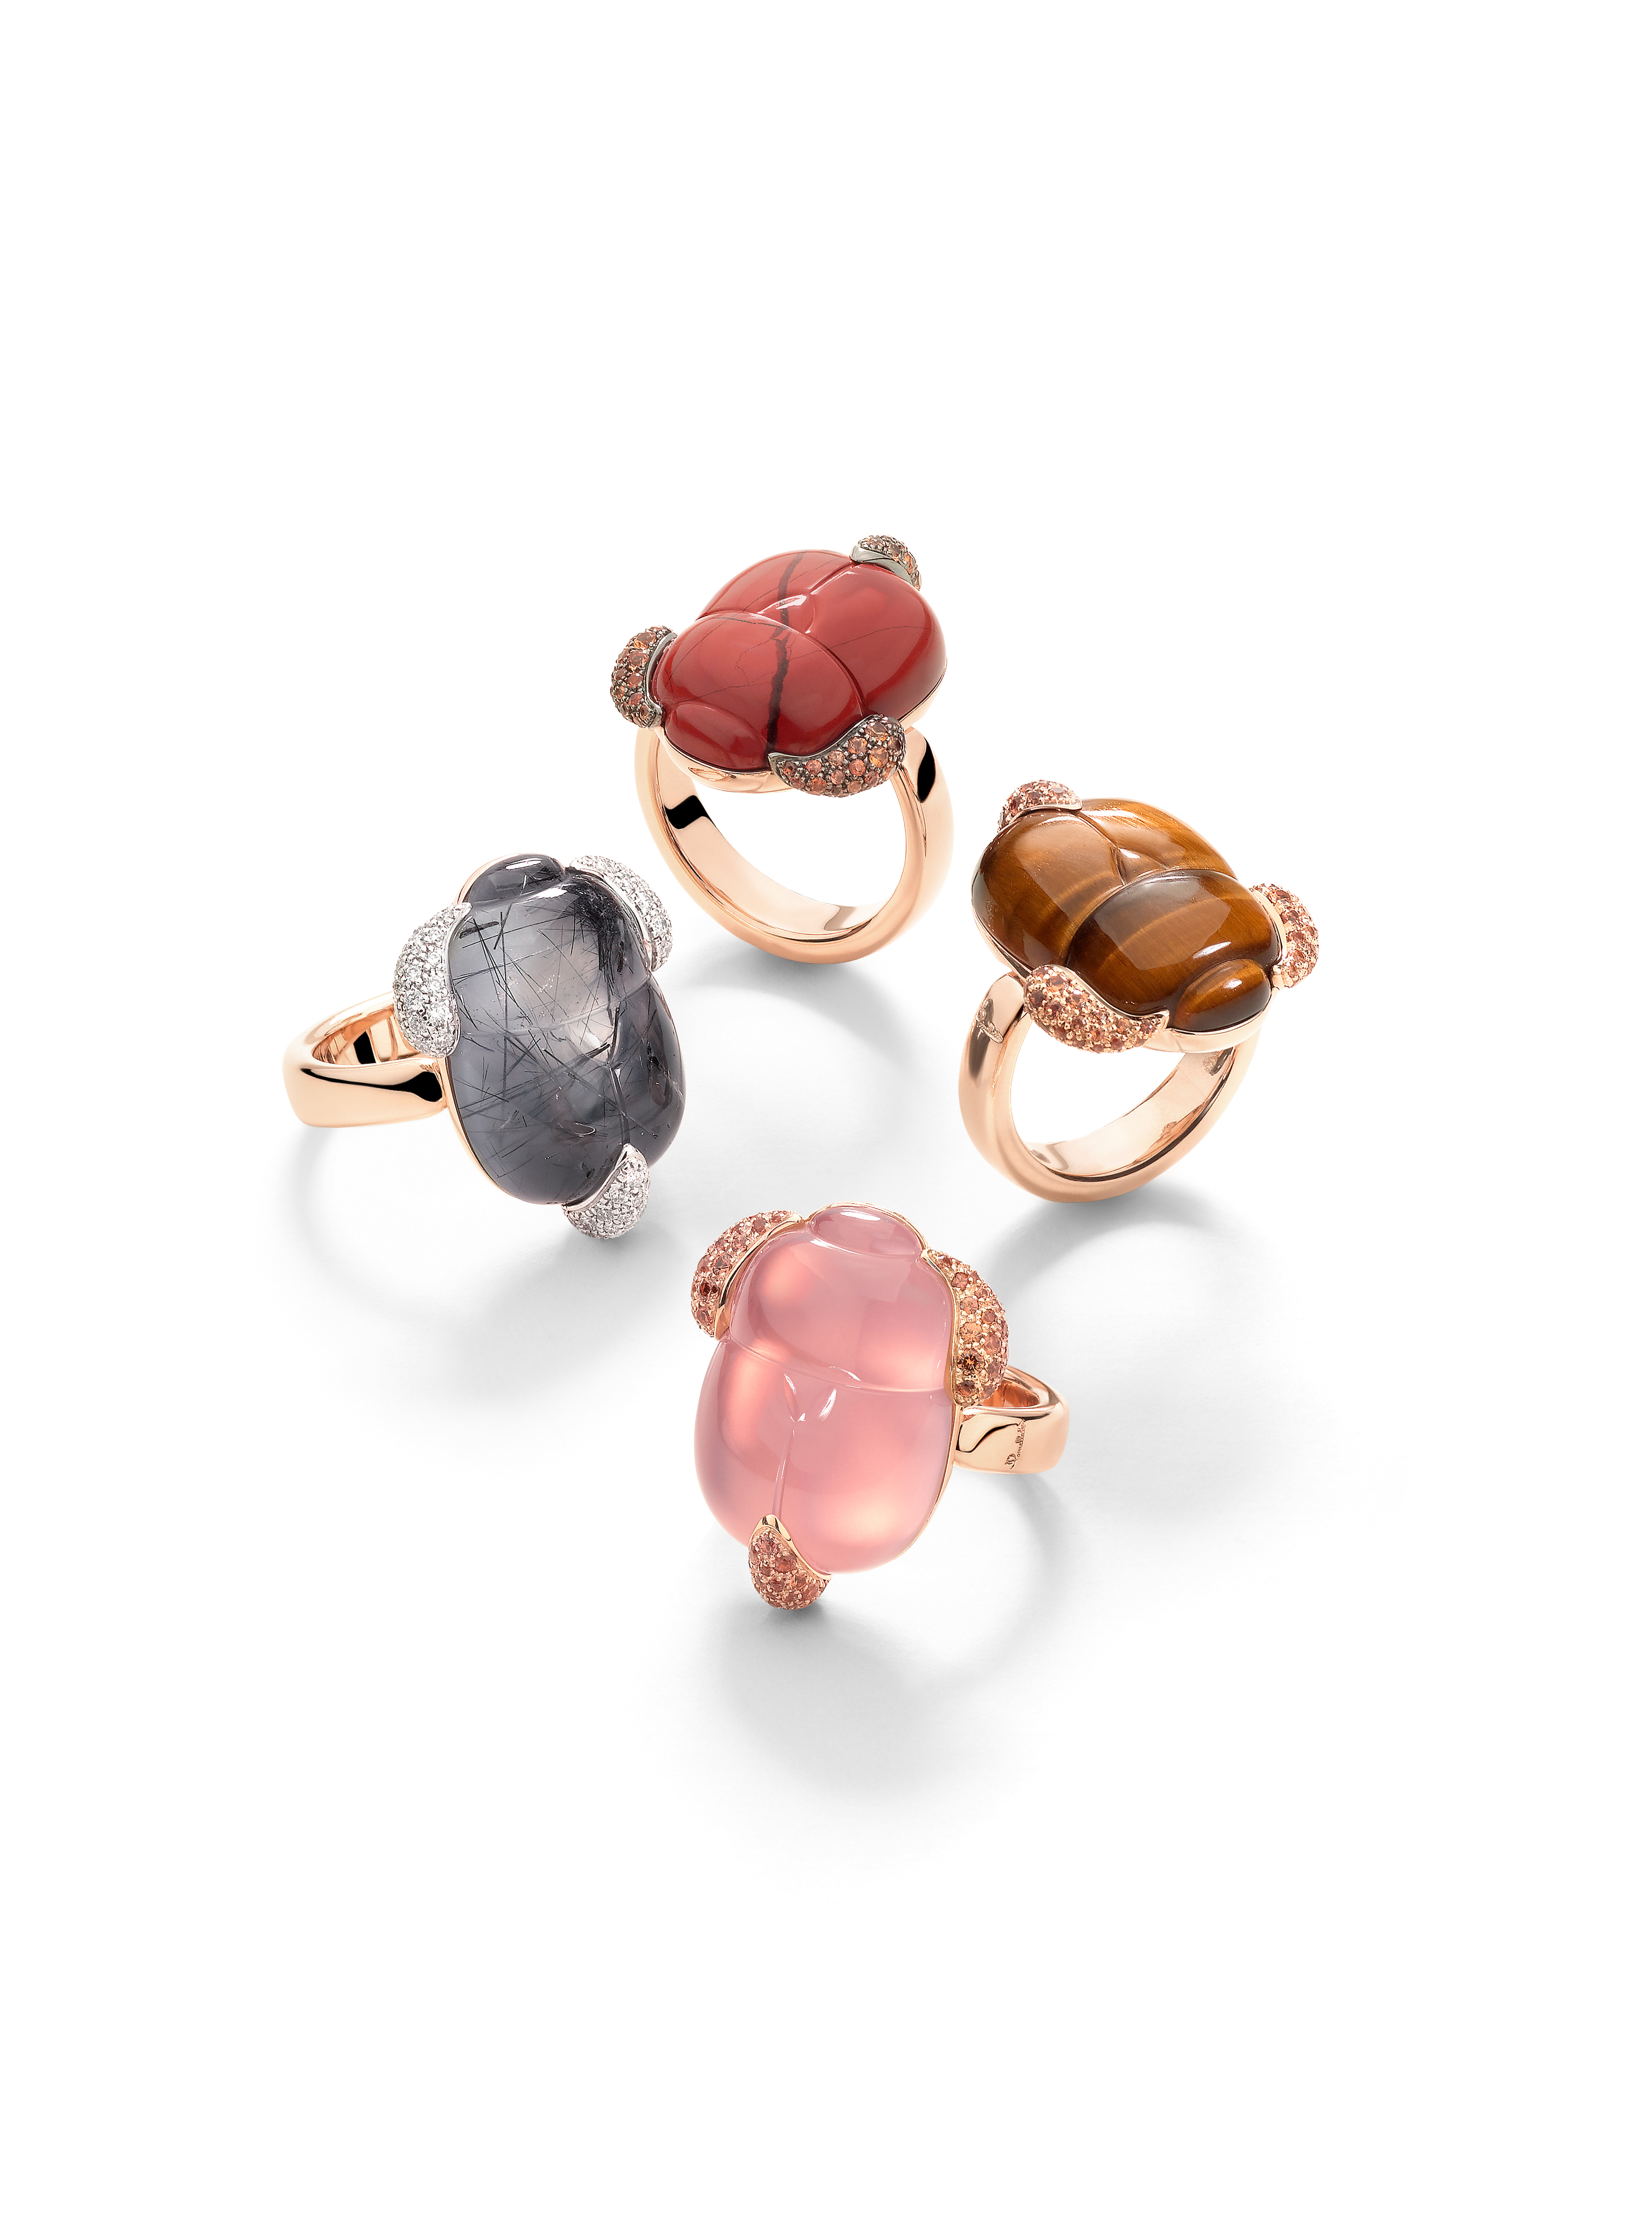 A group of rings with different colored stones

Description automatically generated